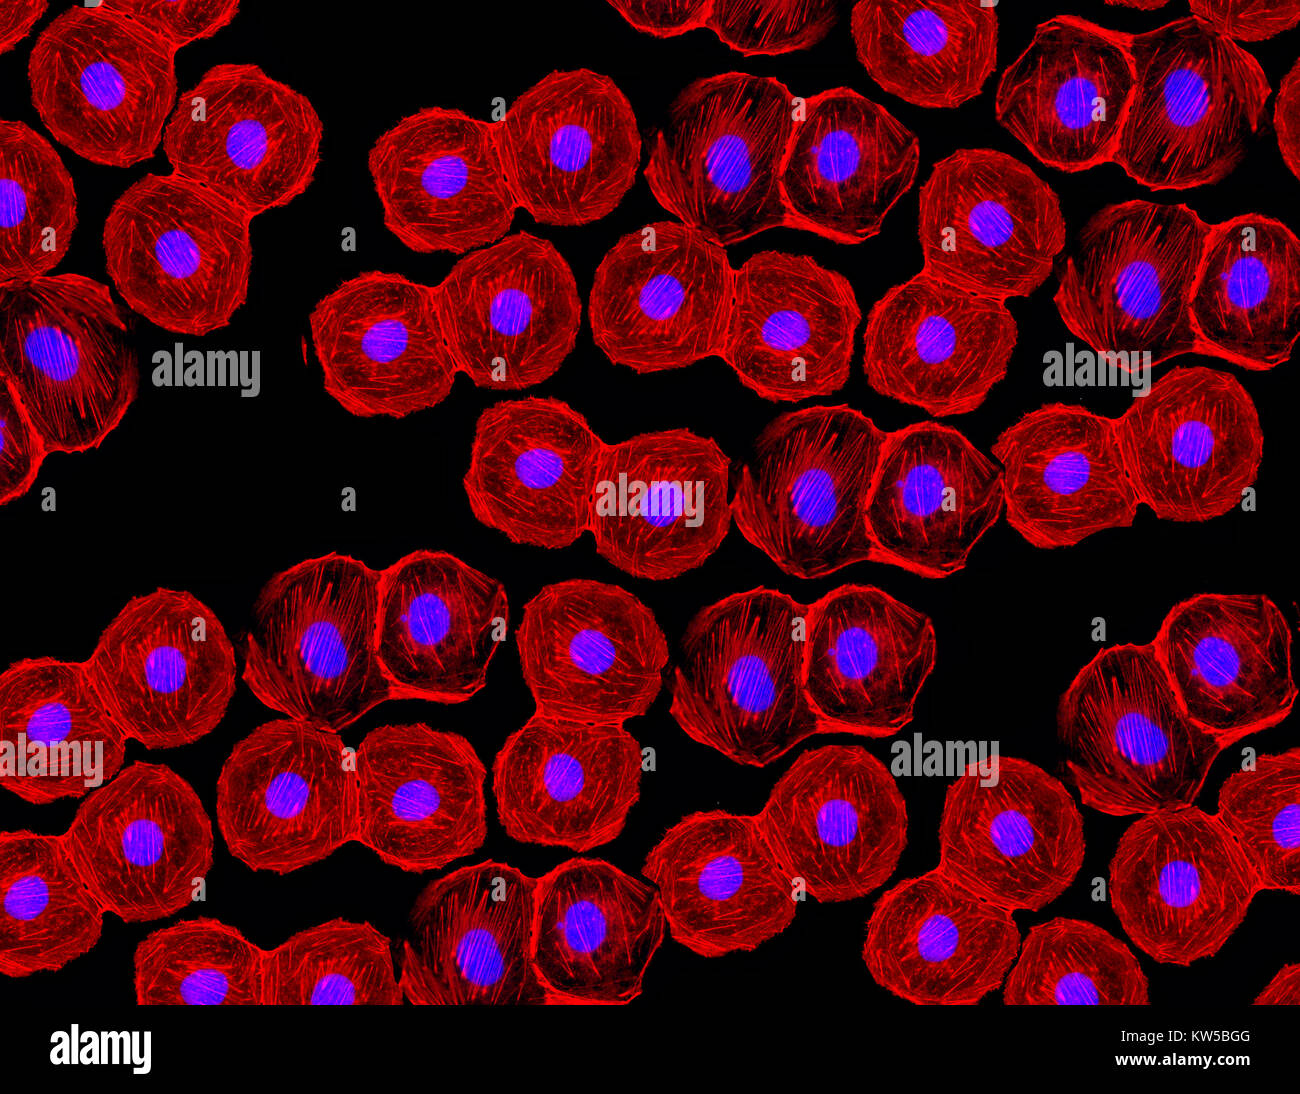 Fluorescent image of human stem cells stained with monoclonal antibodies markers under the microscopy showing nuclei in blue and microtubules in red Stock Photo